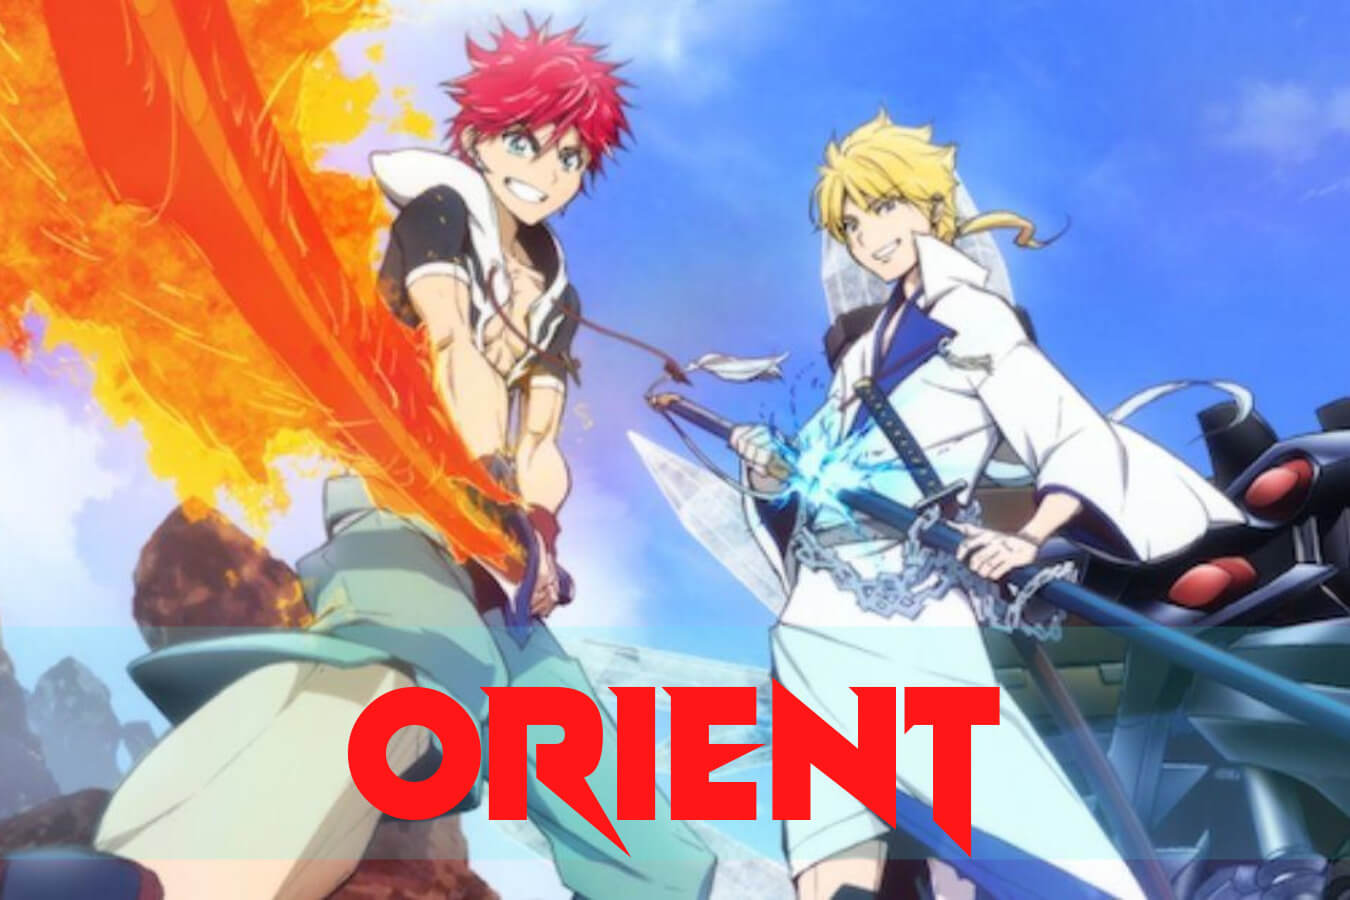 Will there be any Updates on the Orient Anime Trailer?